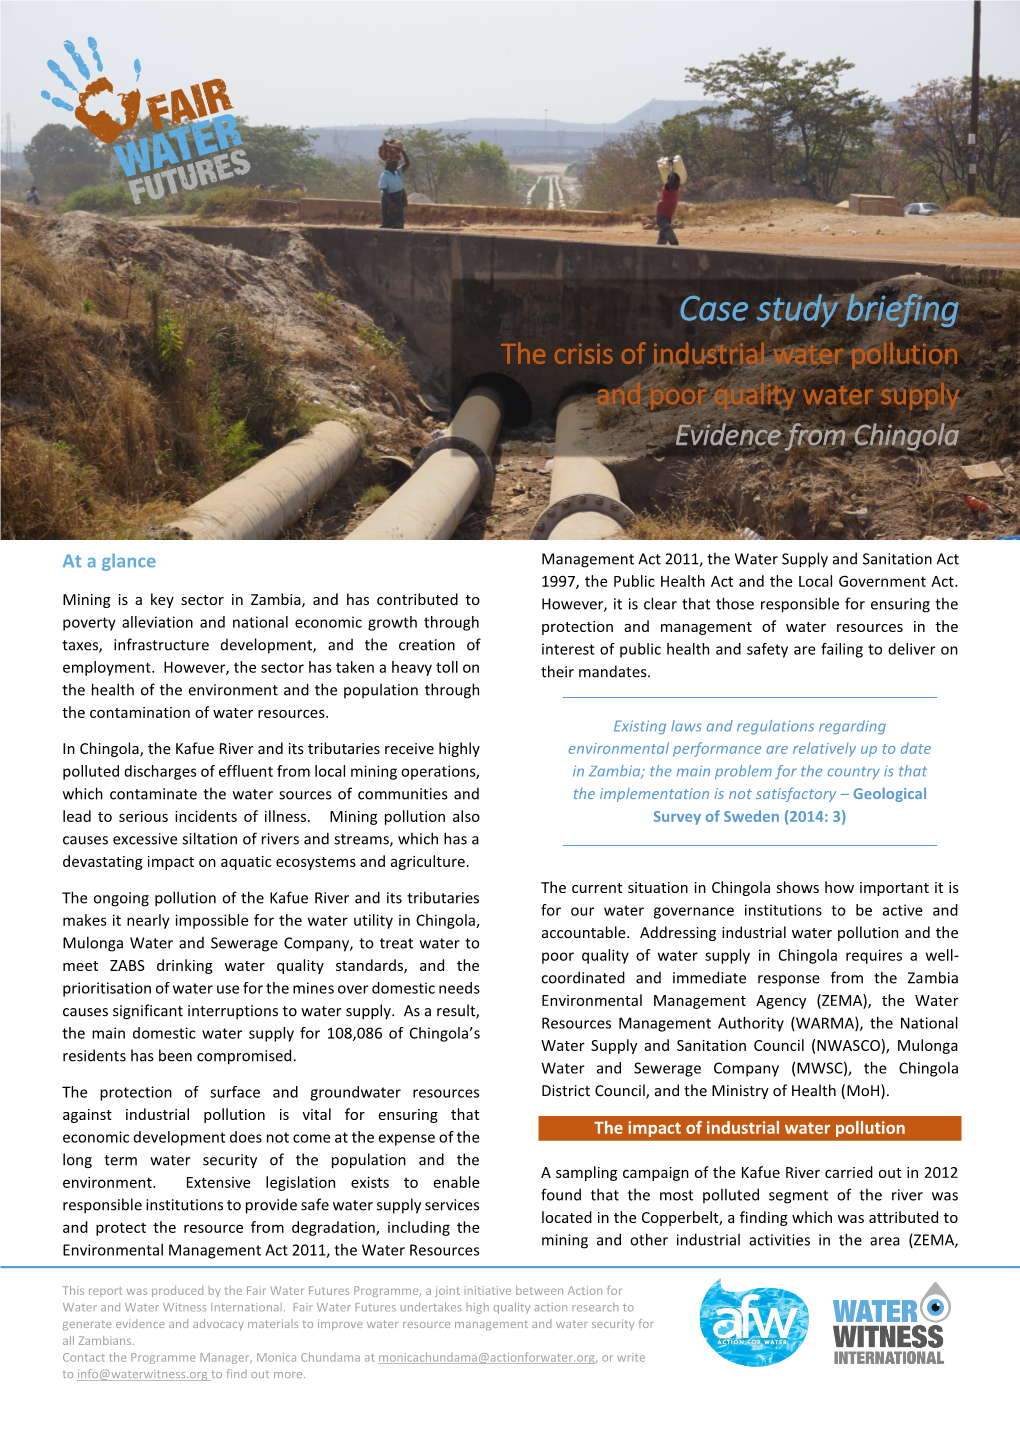 Case Study Briefing the Crisis of Industrial Water Pollution and Poor Quality Water Supply